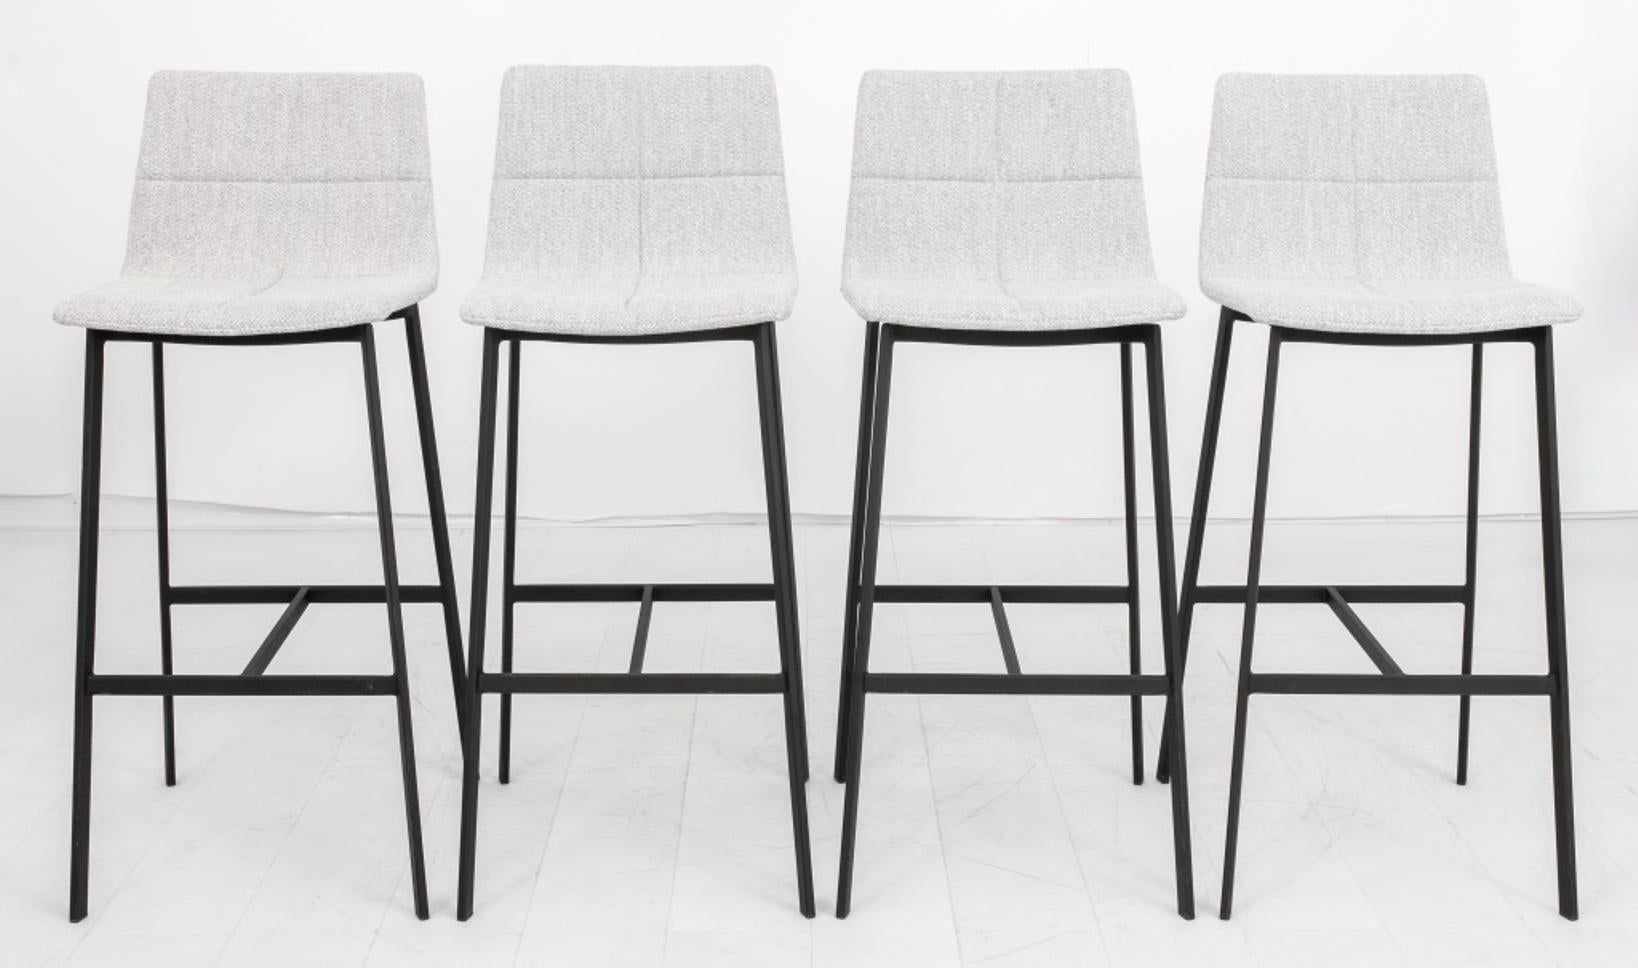 Four Modern grey boucle upholstered bar stools on tall legs conjoined by an H stretcher.

Dimensions: 42